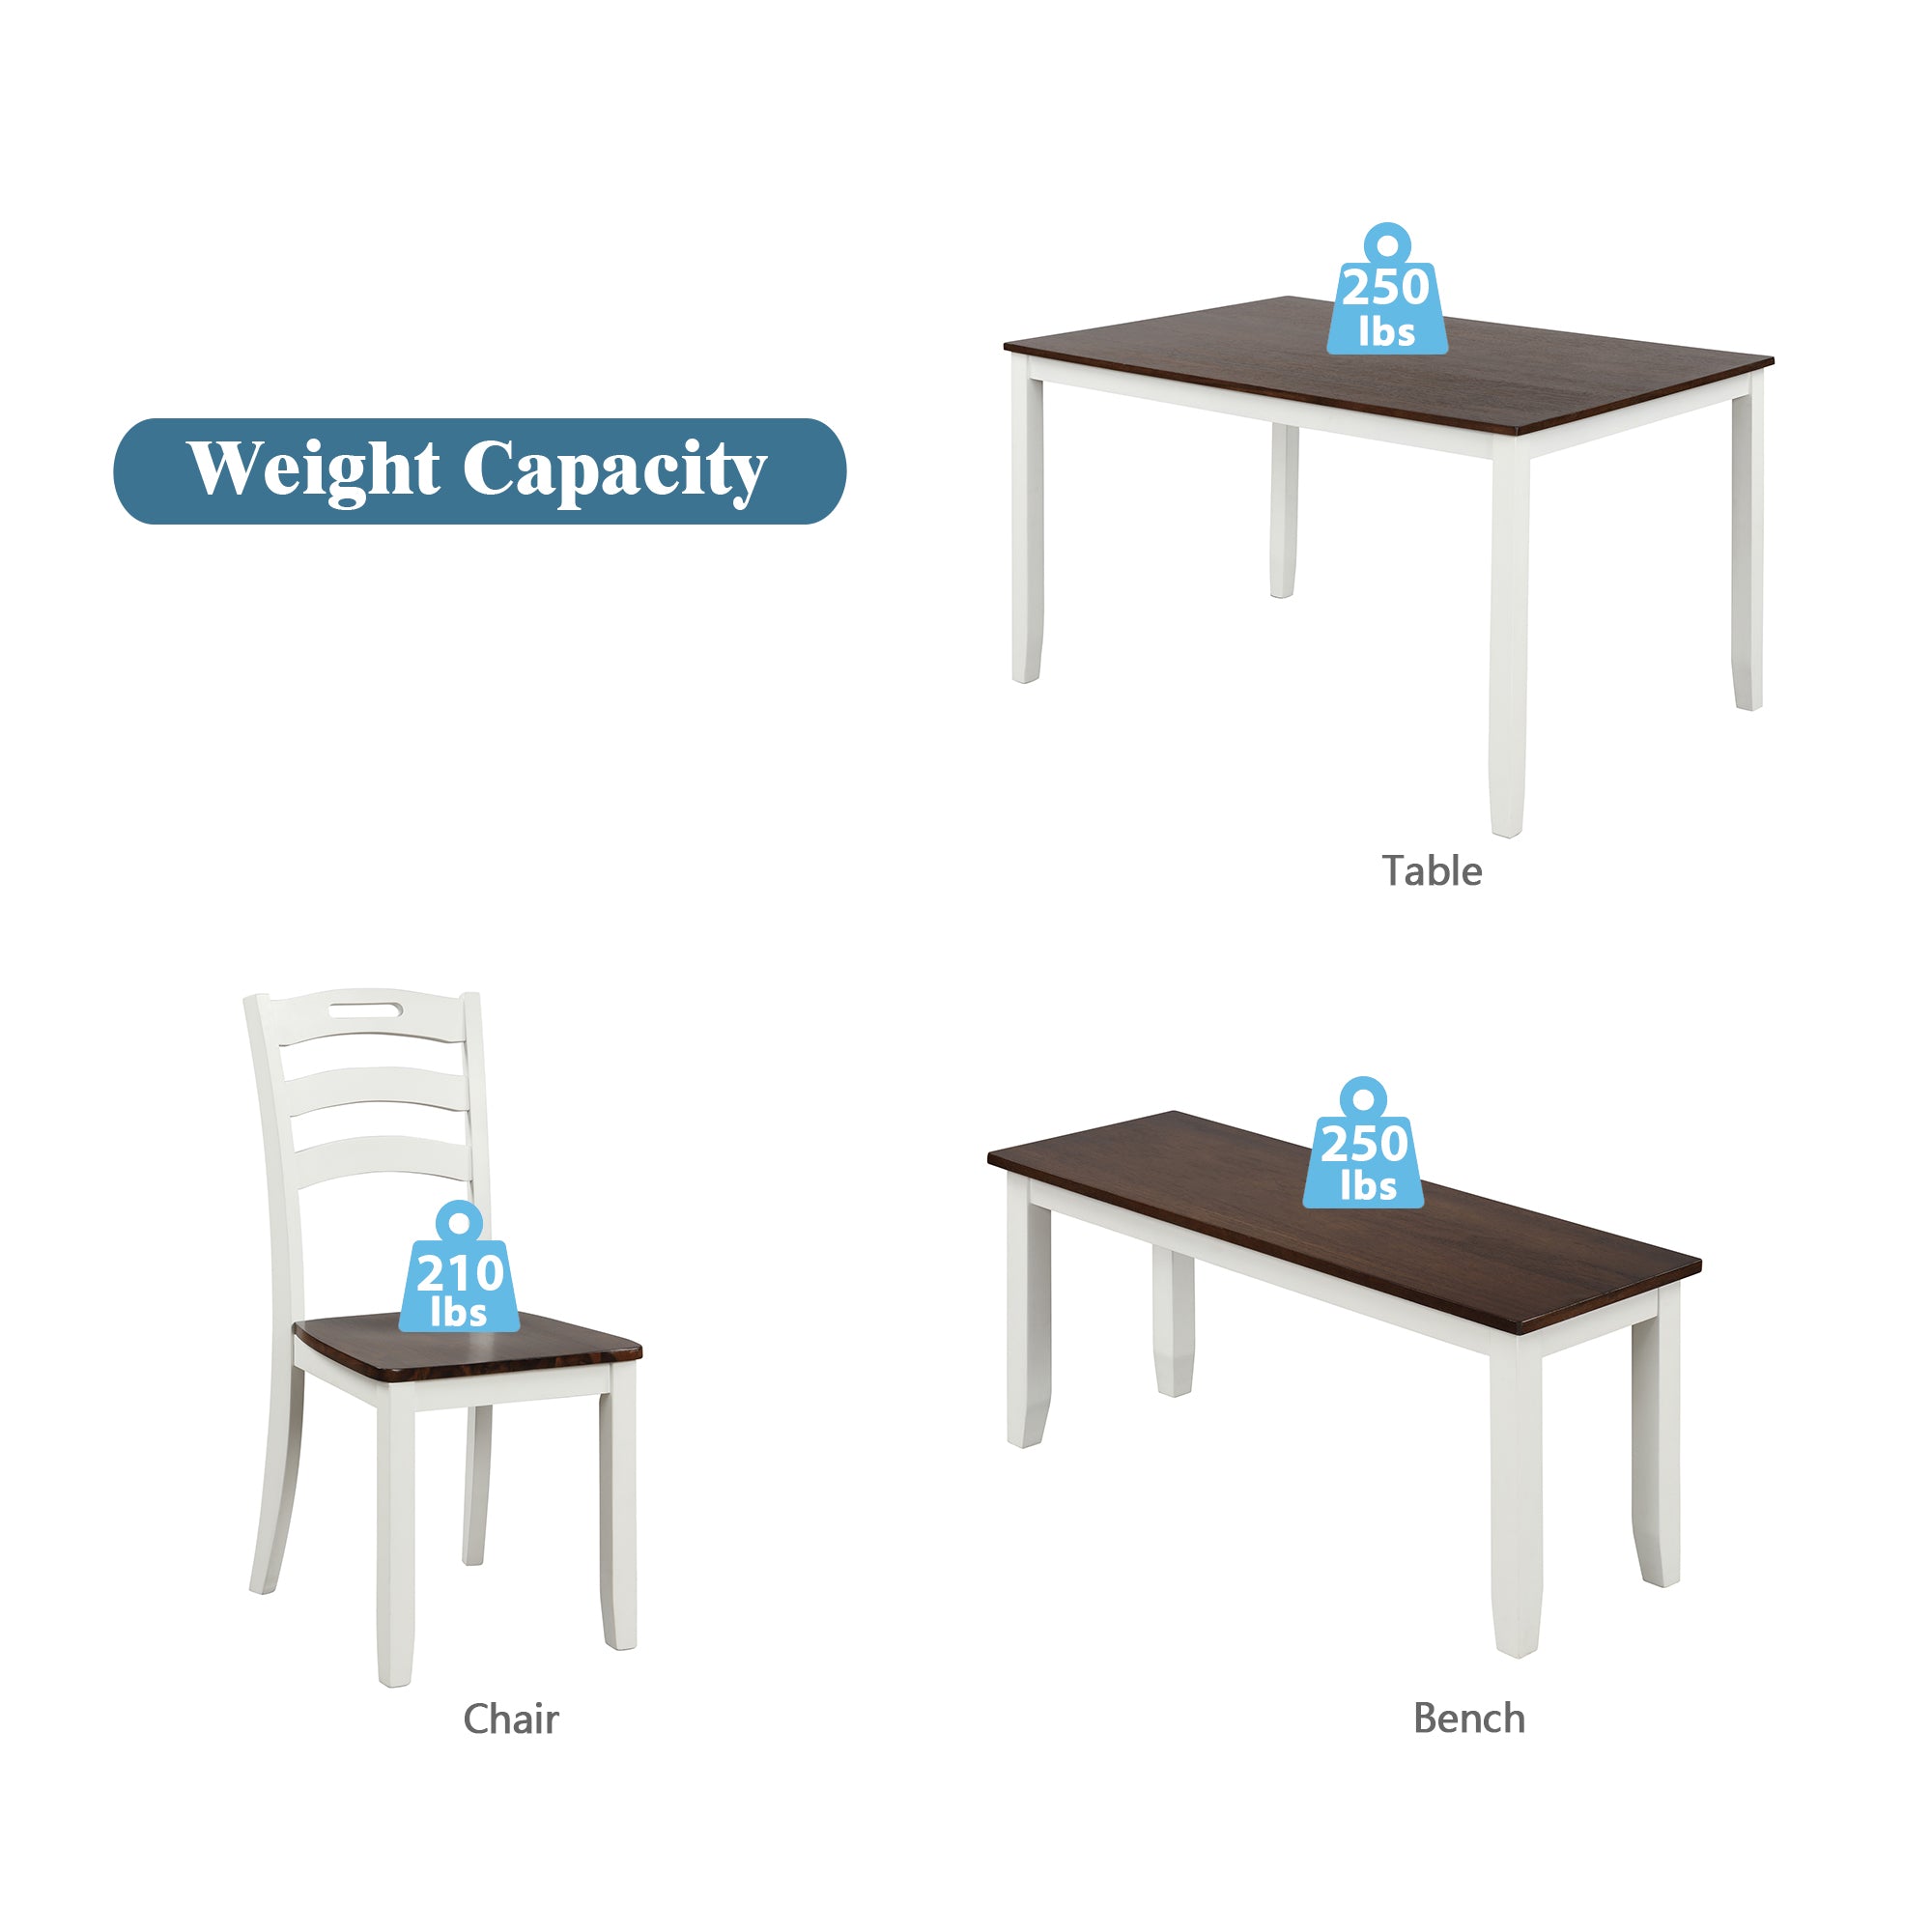 Bellemave® 6 Piece Dining Table Set with Bench and Waterproof Coat Bellemave®